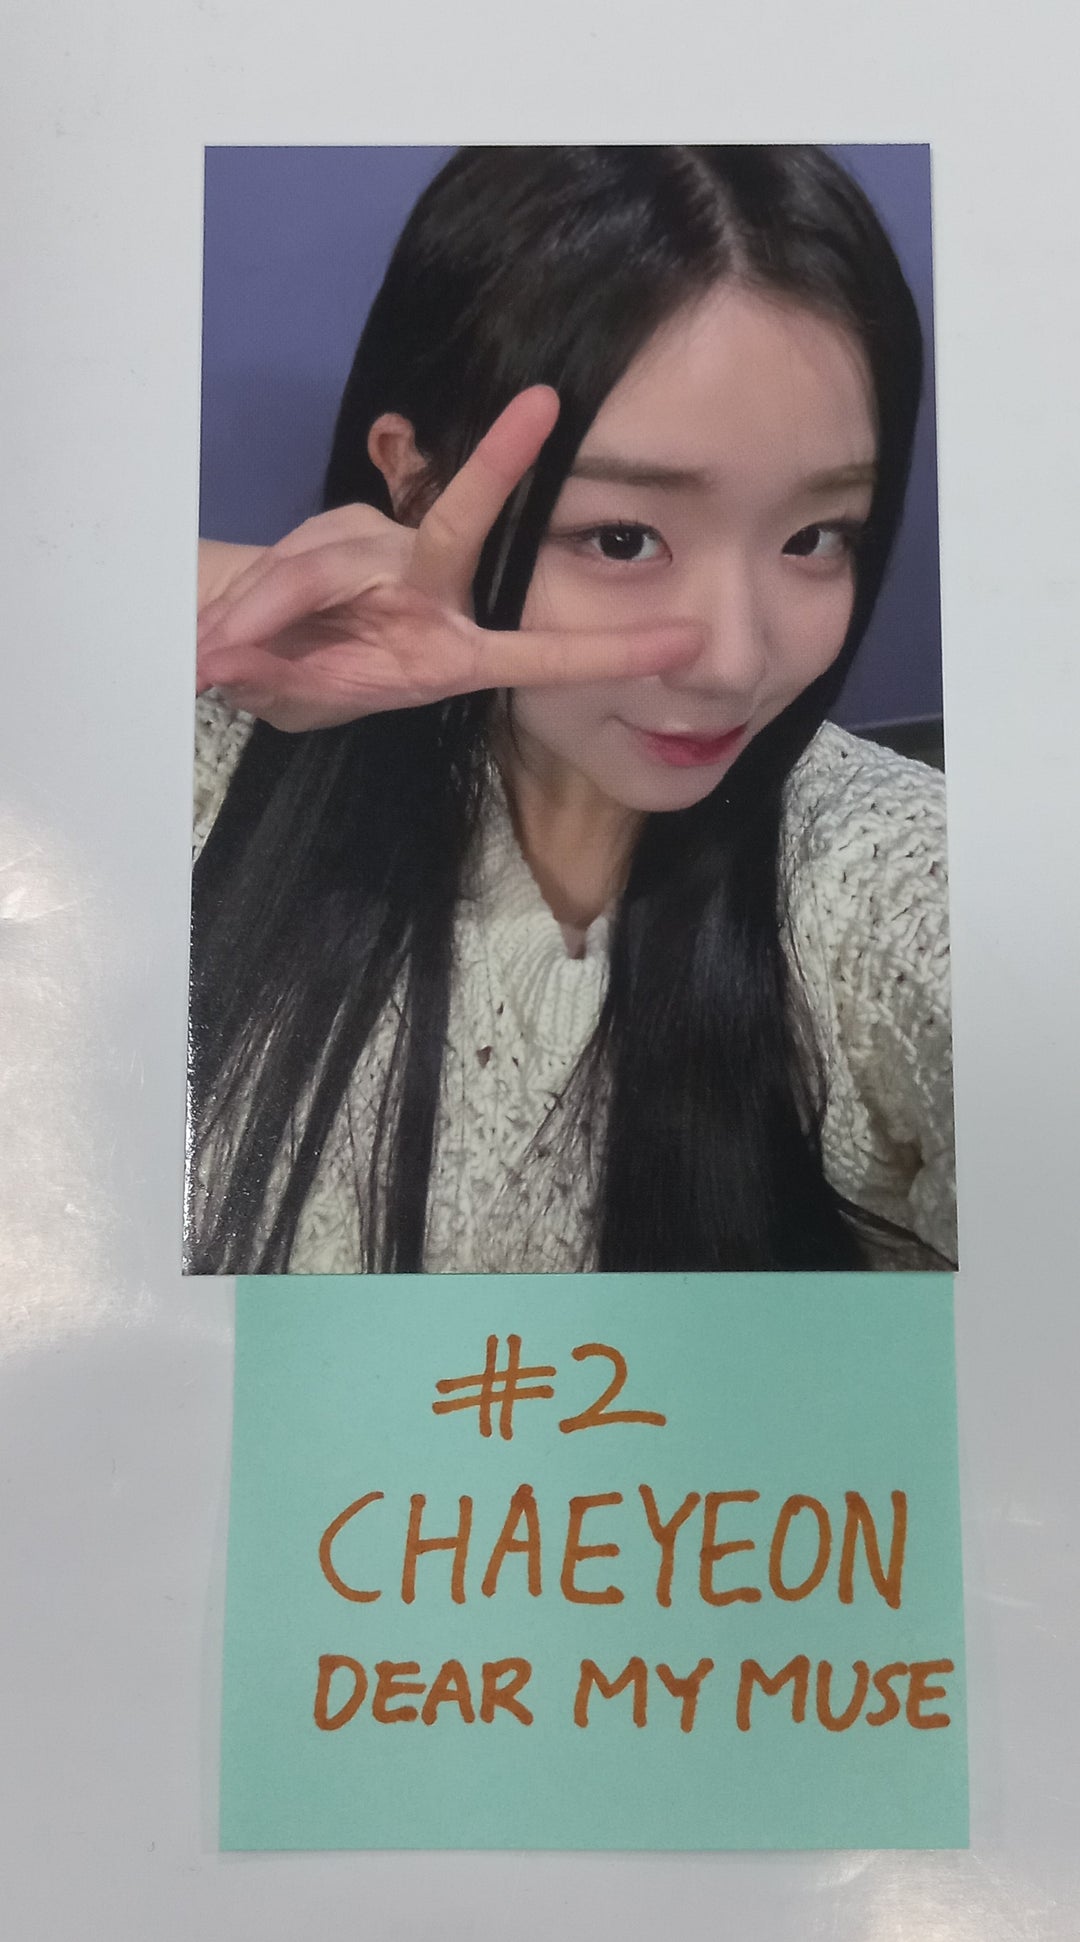 tripleS "EVOLution : Mujuk" - Dear My Muse Fansign Event Photocard Round 2 [24.1.18]